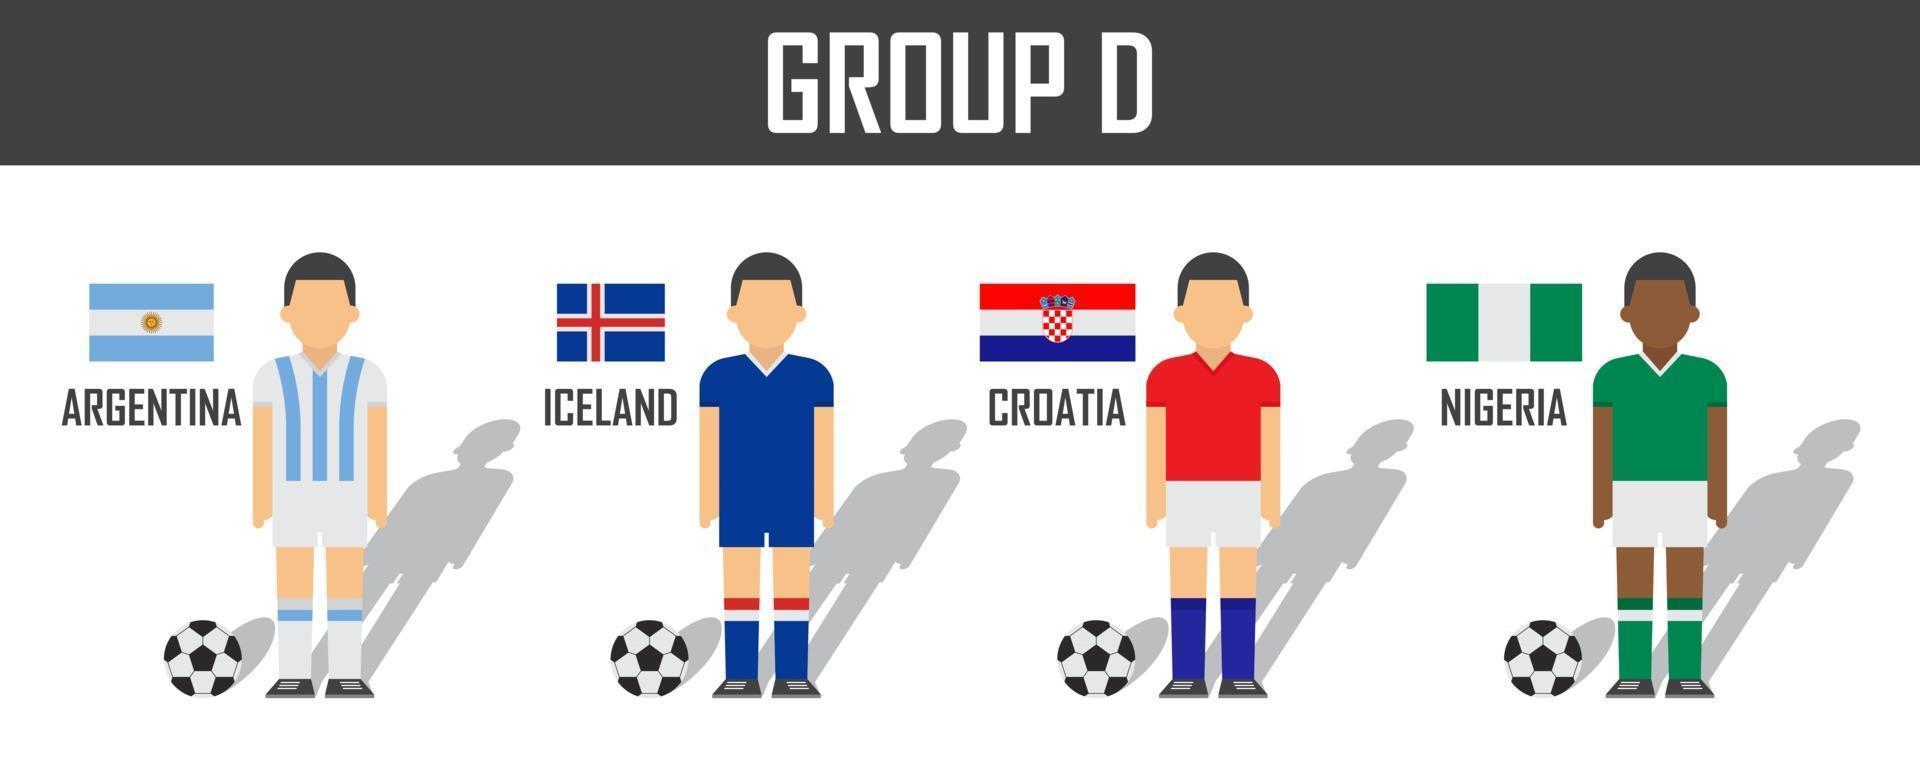 Soccer cup 2018 team group D . Football players with jersey uniform and national flags . Vector for international world championship tournament .